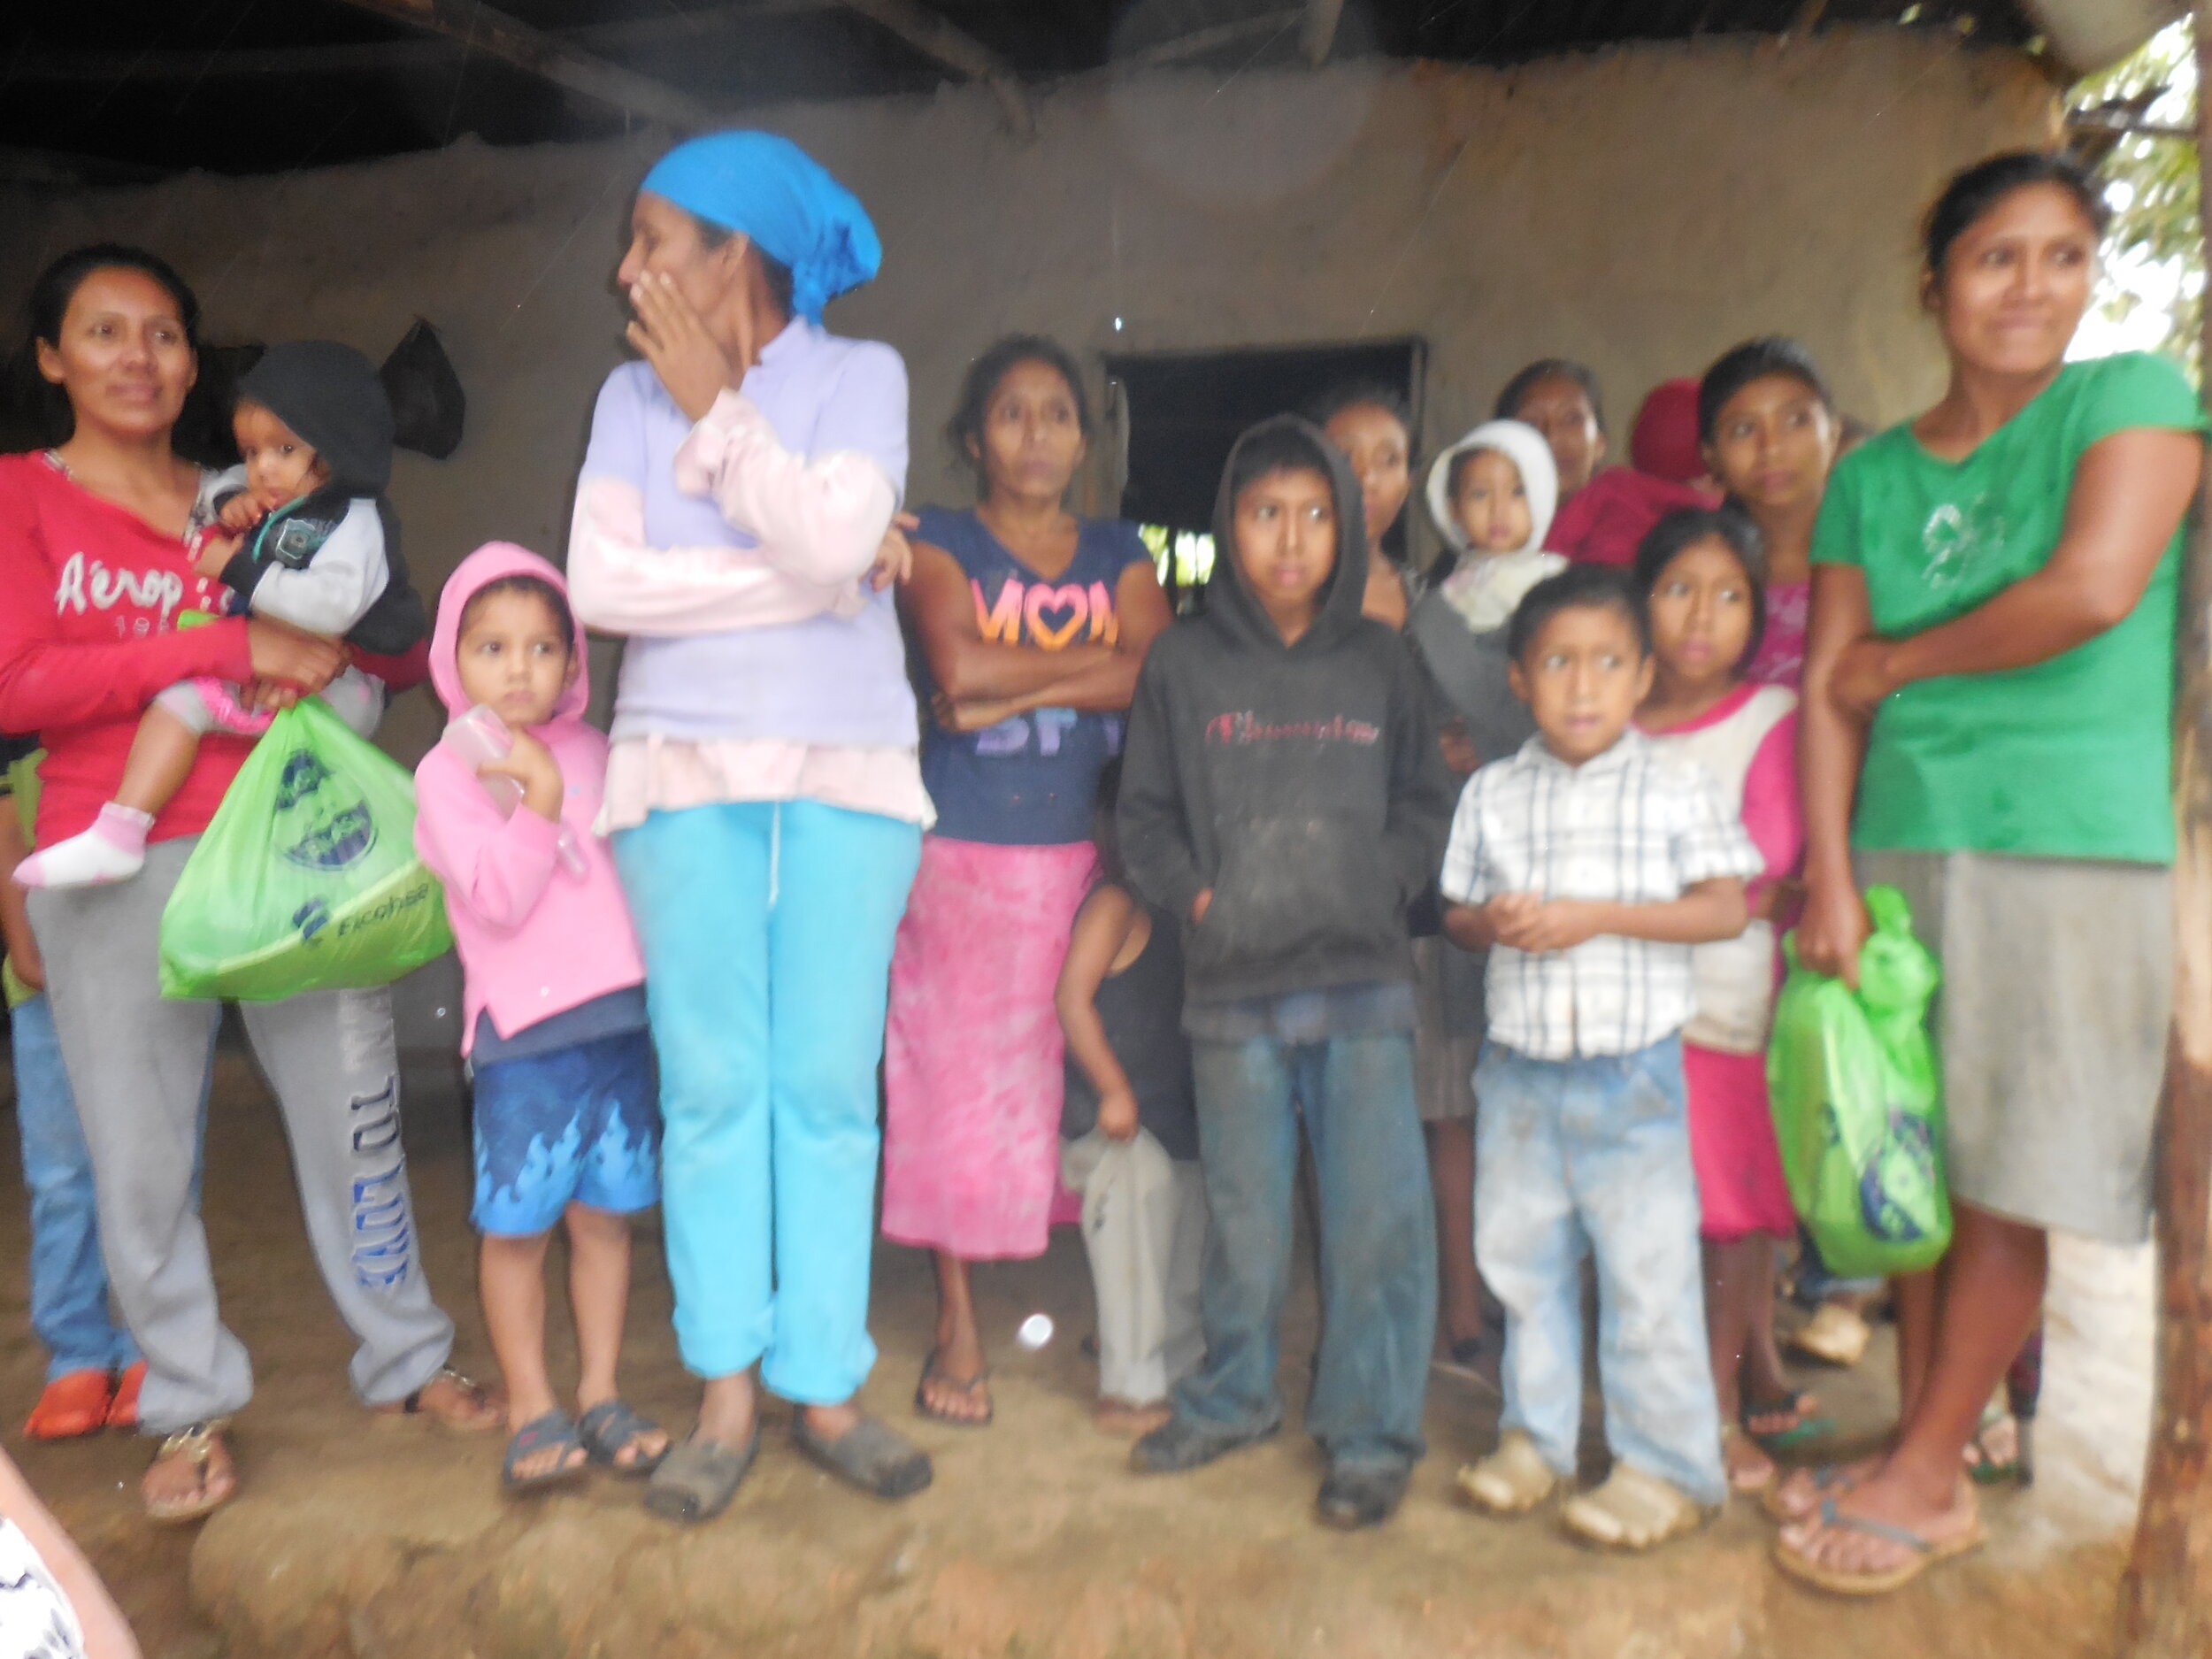 This group of women and children in an indigenous village have few latrines and poor access to family planning — connecting them to ACTS services is a priority.